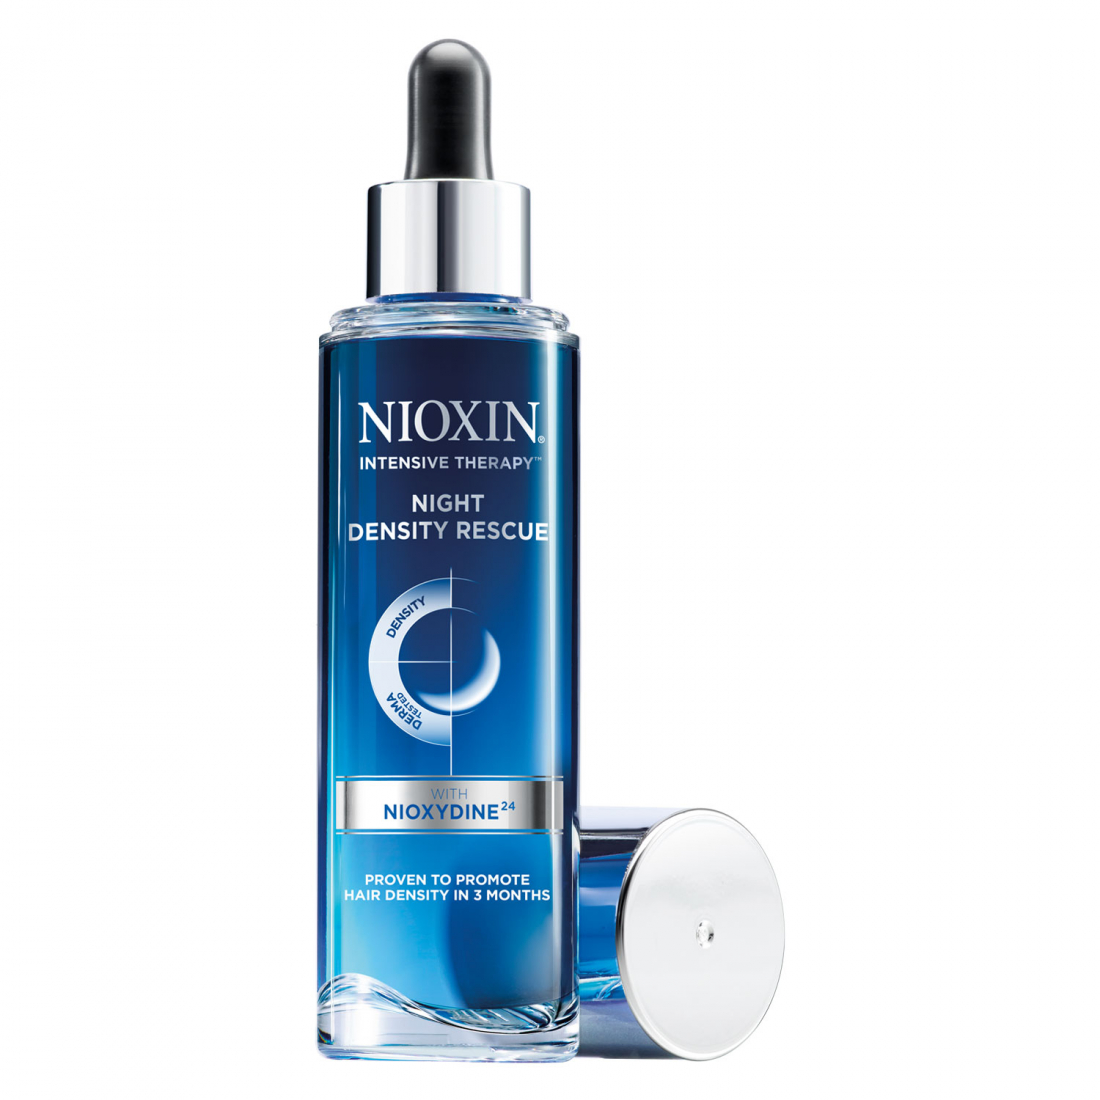 'Night Density Rescue' Leave-in Treatment - 70 ml